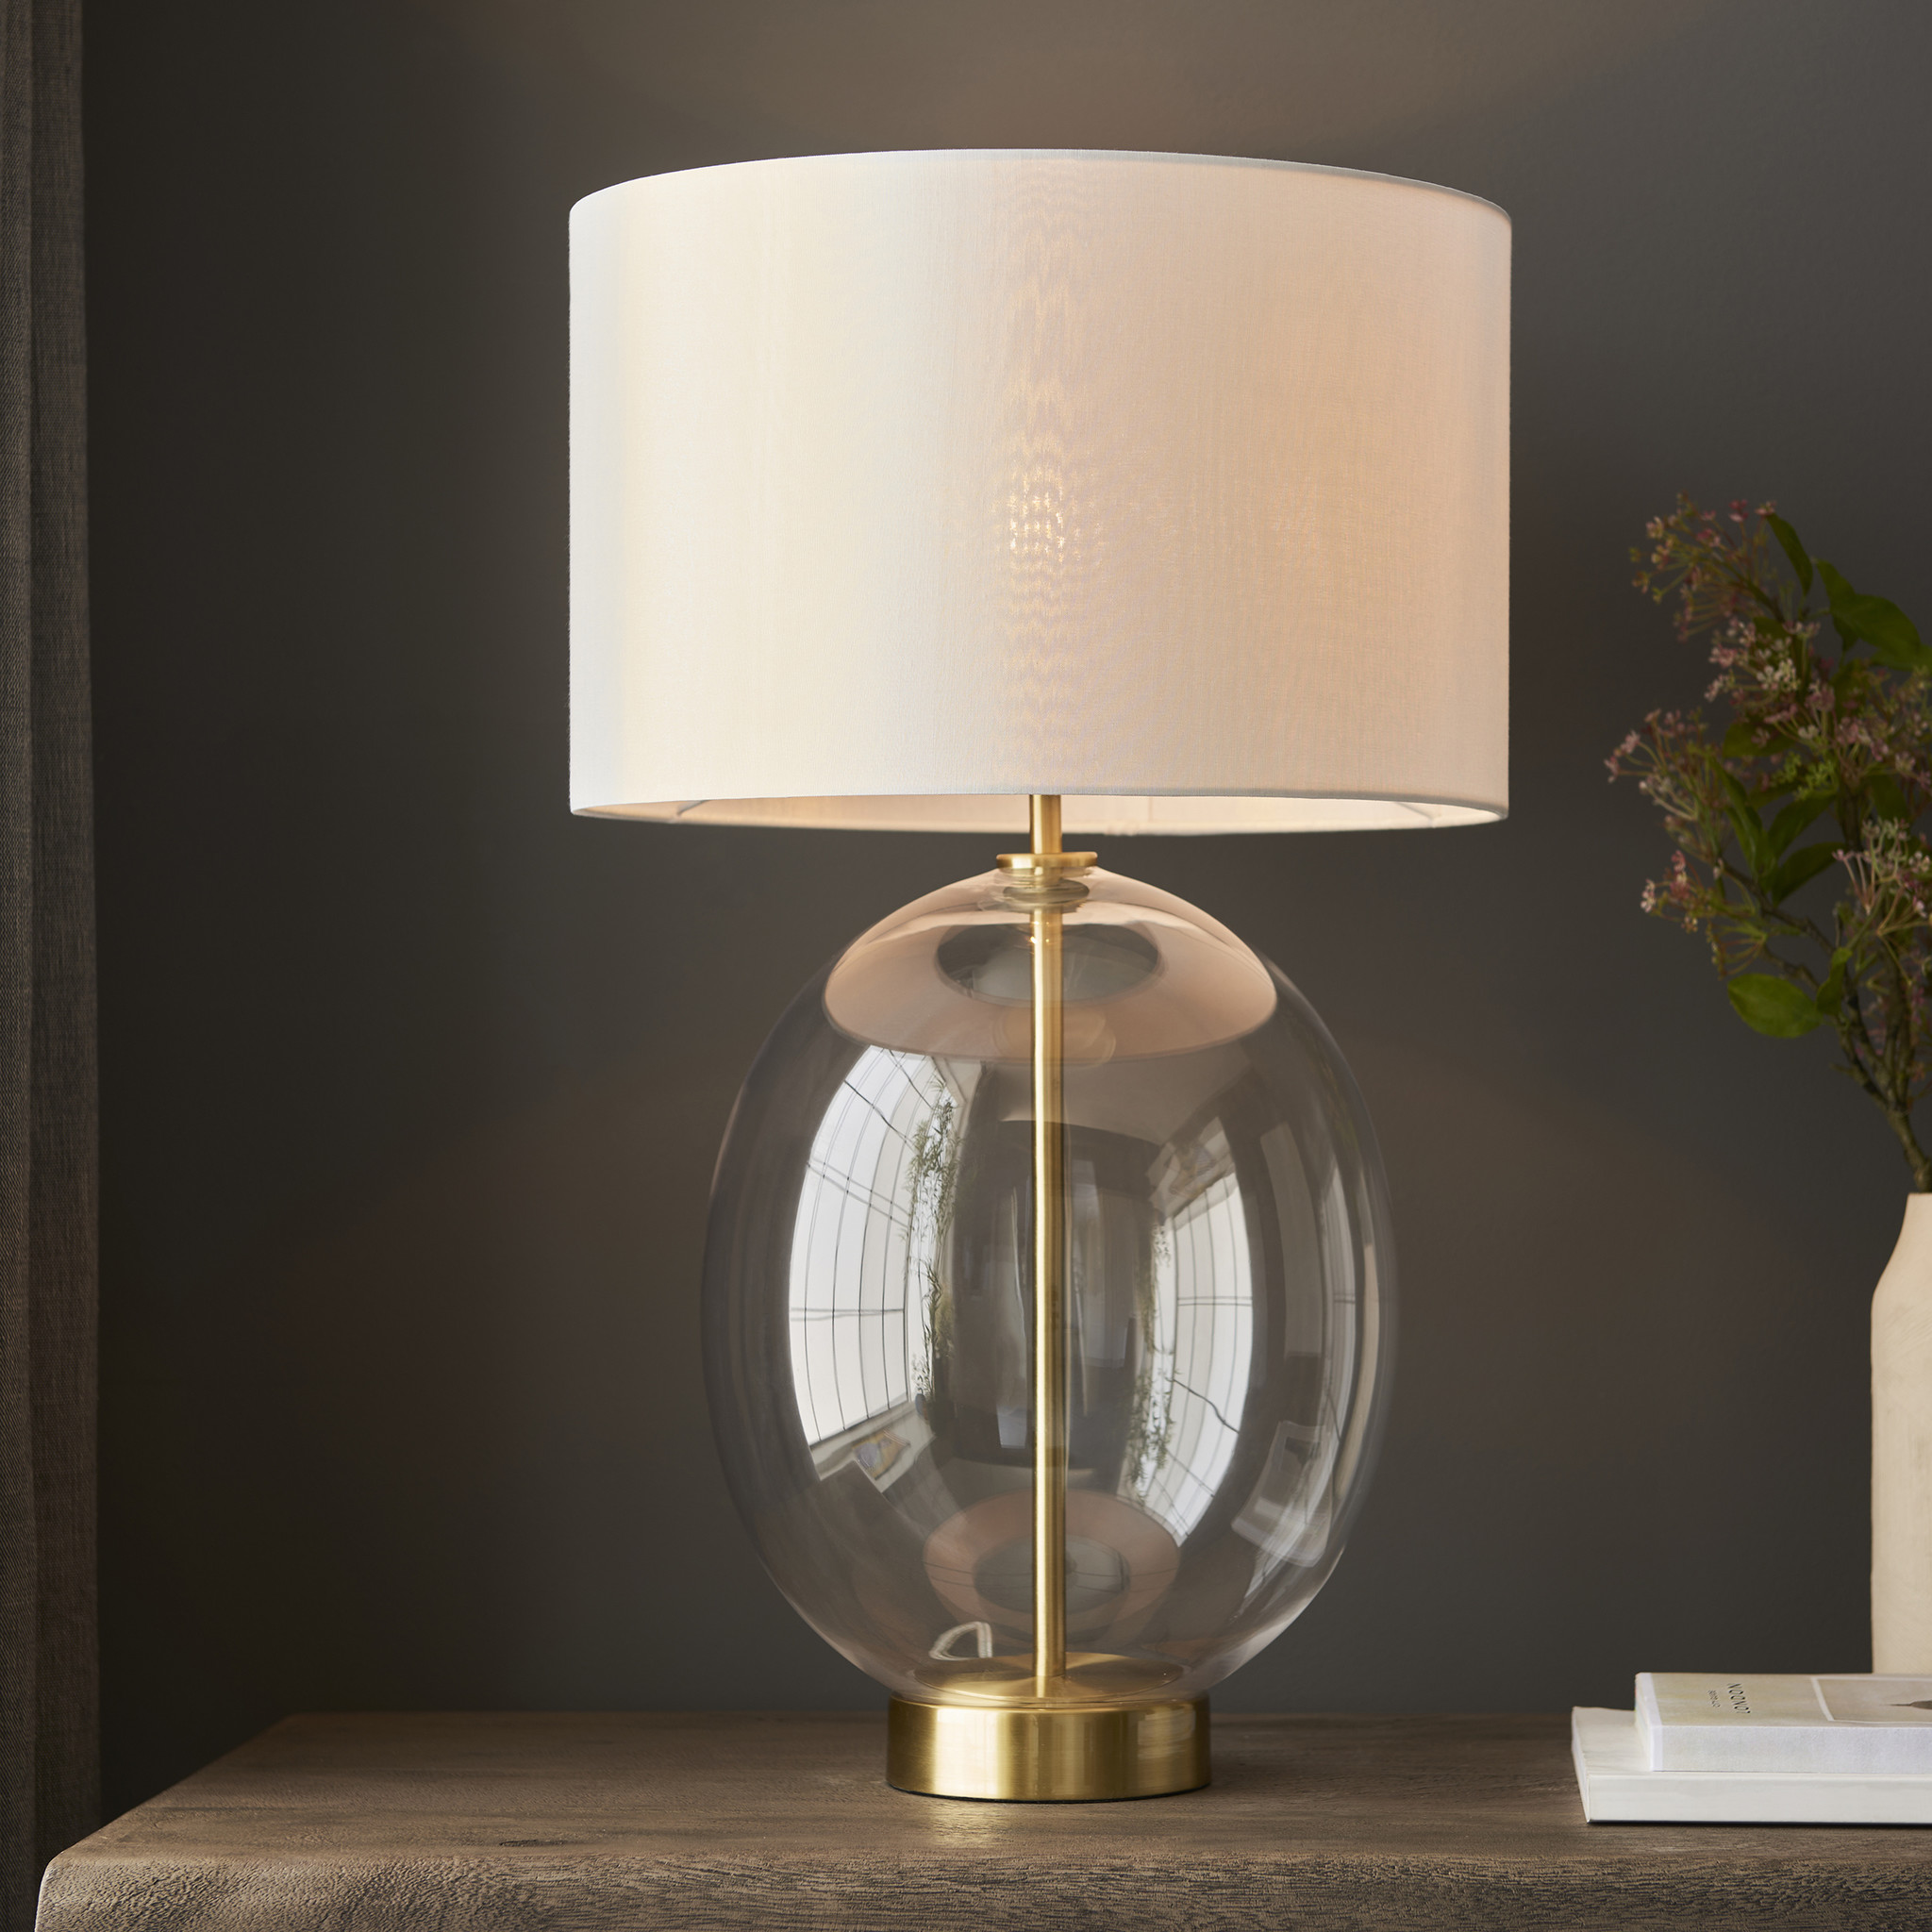 Bettina - Boutique Hotel Style Brass Table Lamp with Vintage White Sha -  Lightbox